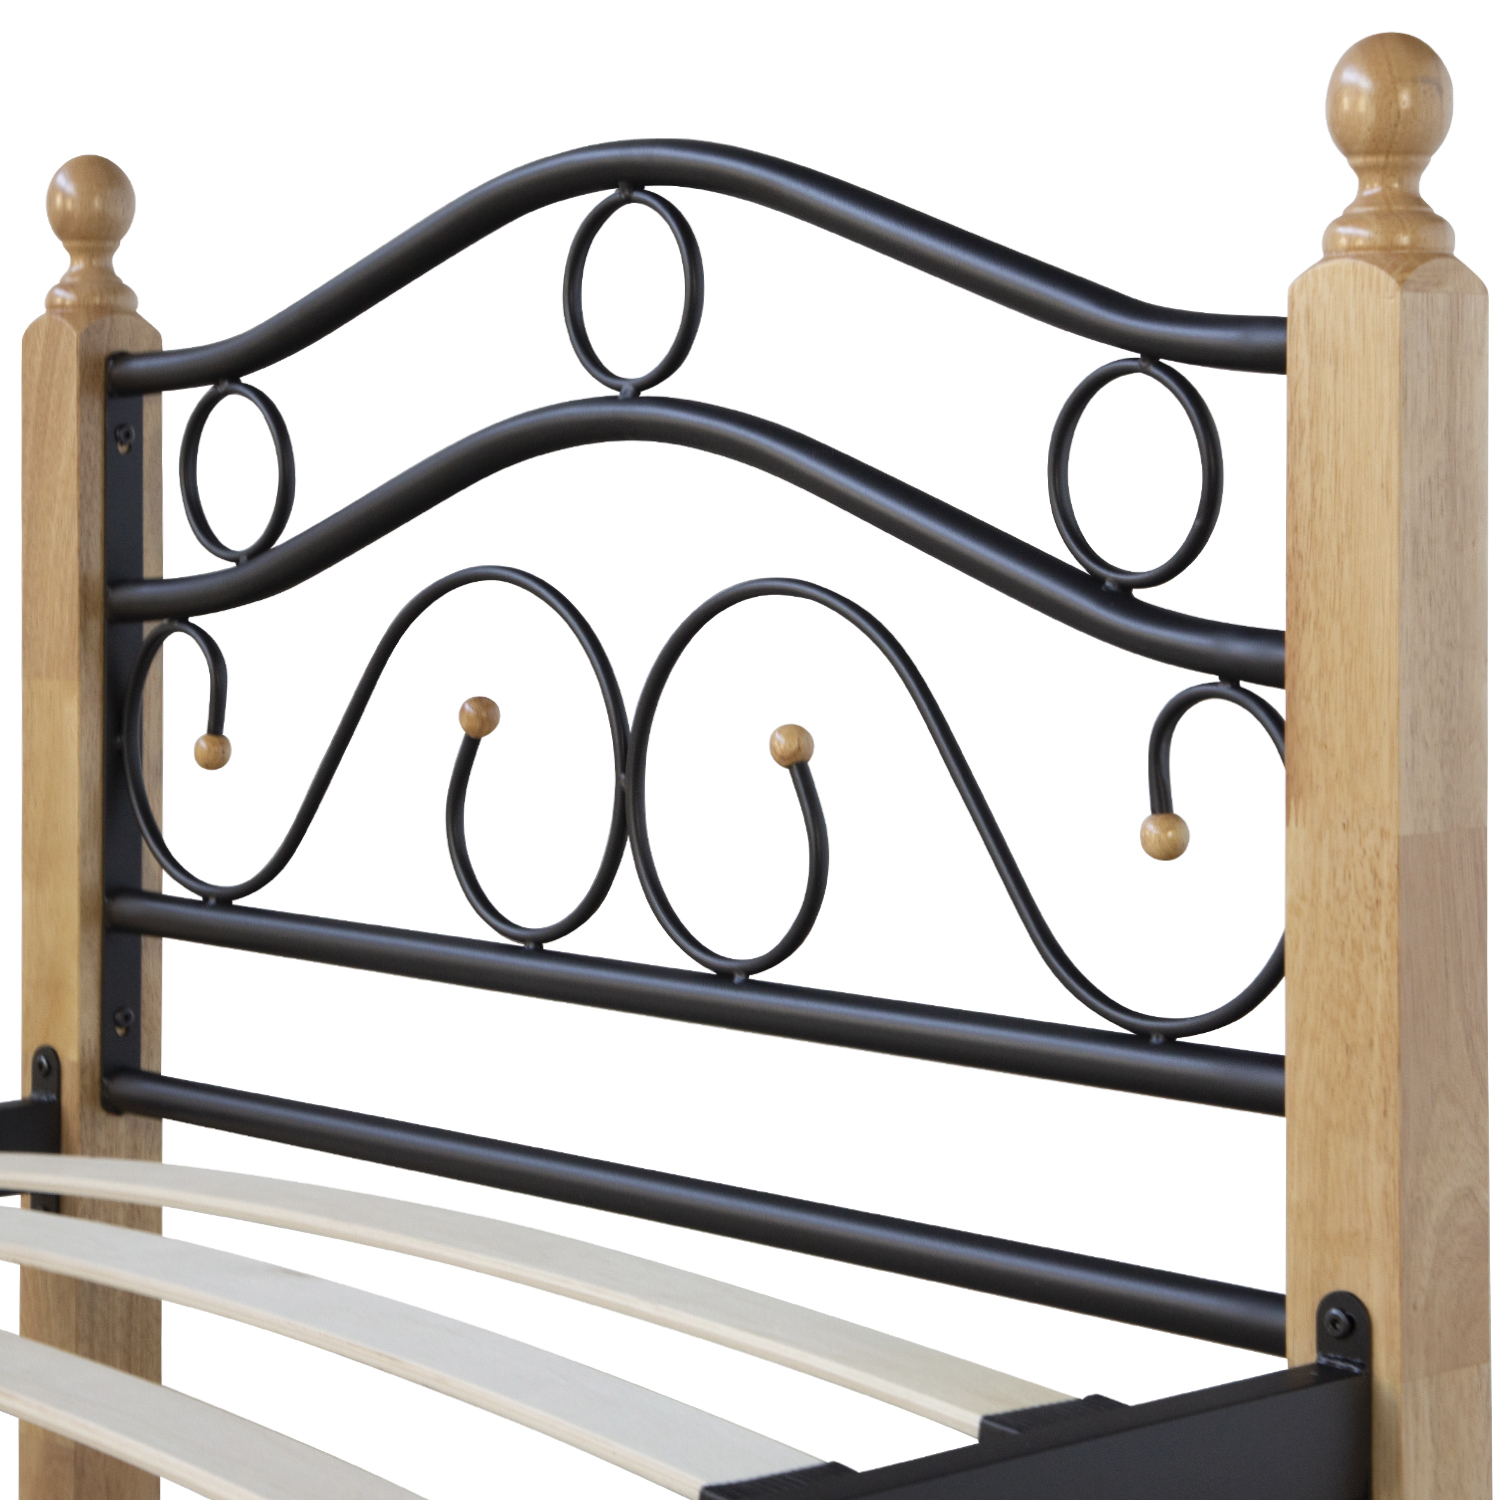 Black metal single bed, 90x200 cm, with a bed frame and slatted base - perfect for a youth bedroom